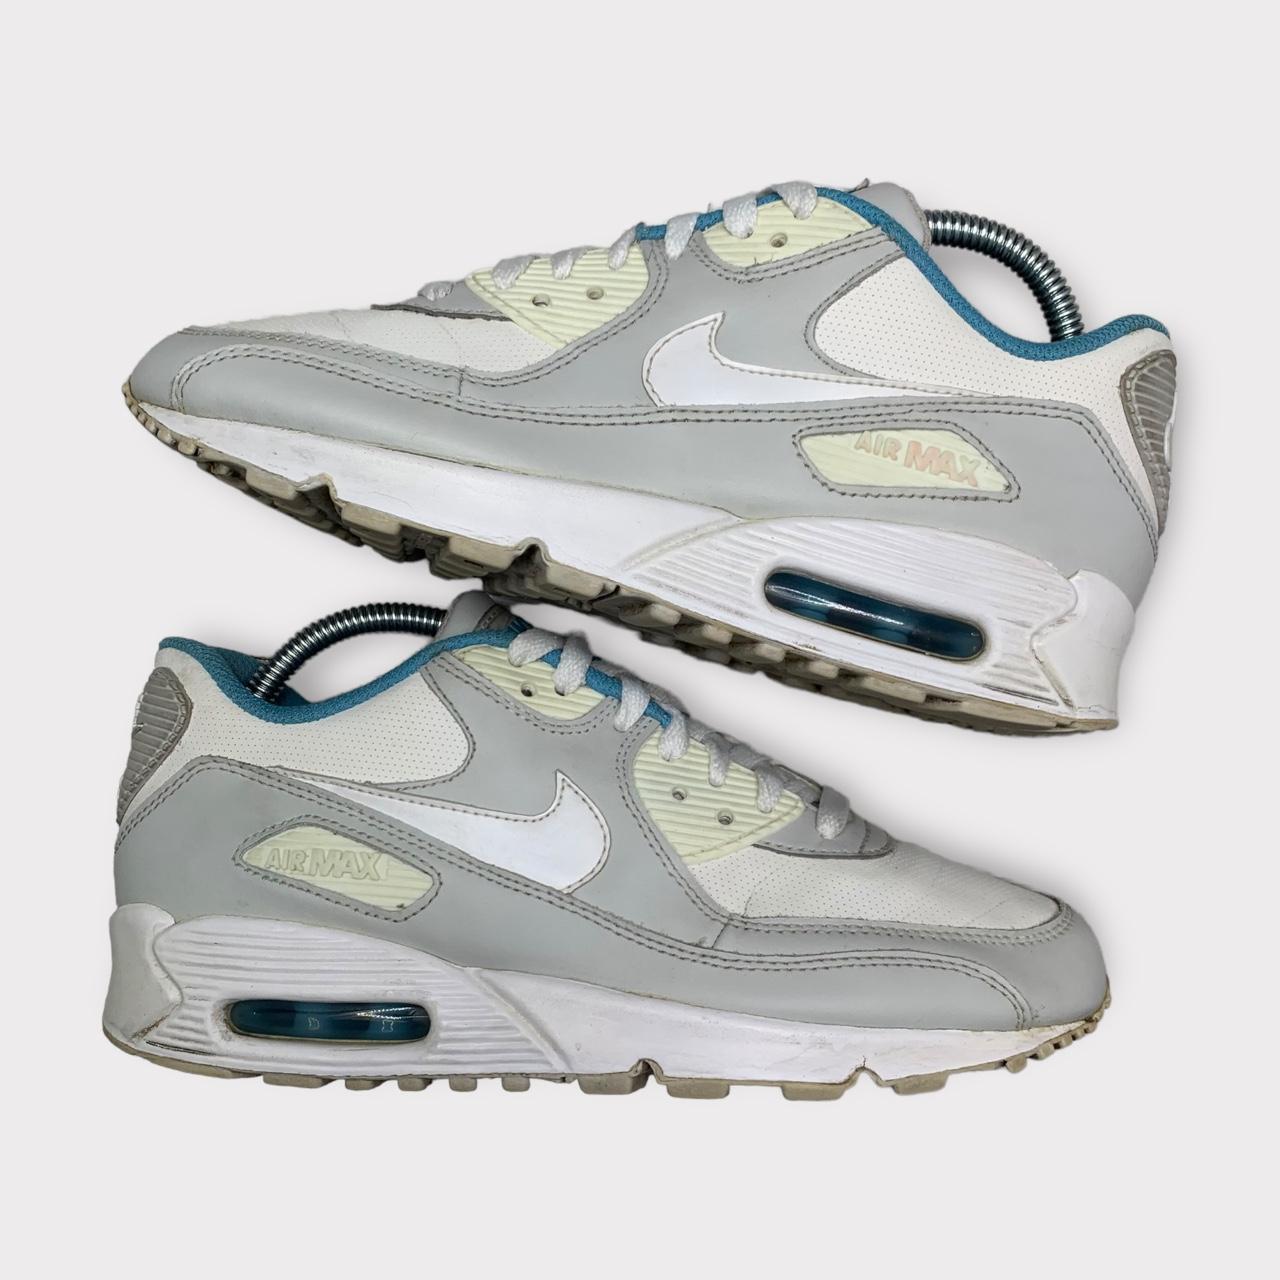 Nike Air Max 90 White Grey GS Trainers Size UK 5.5... - Depop